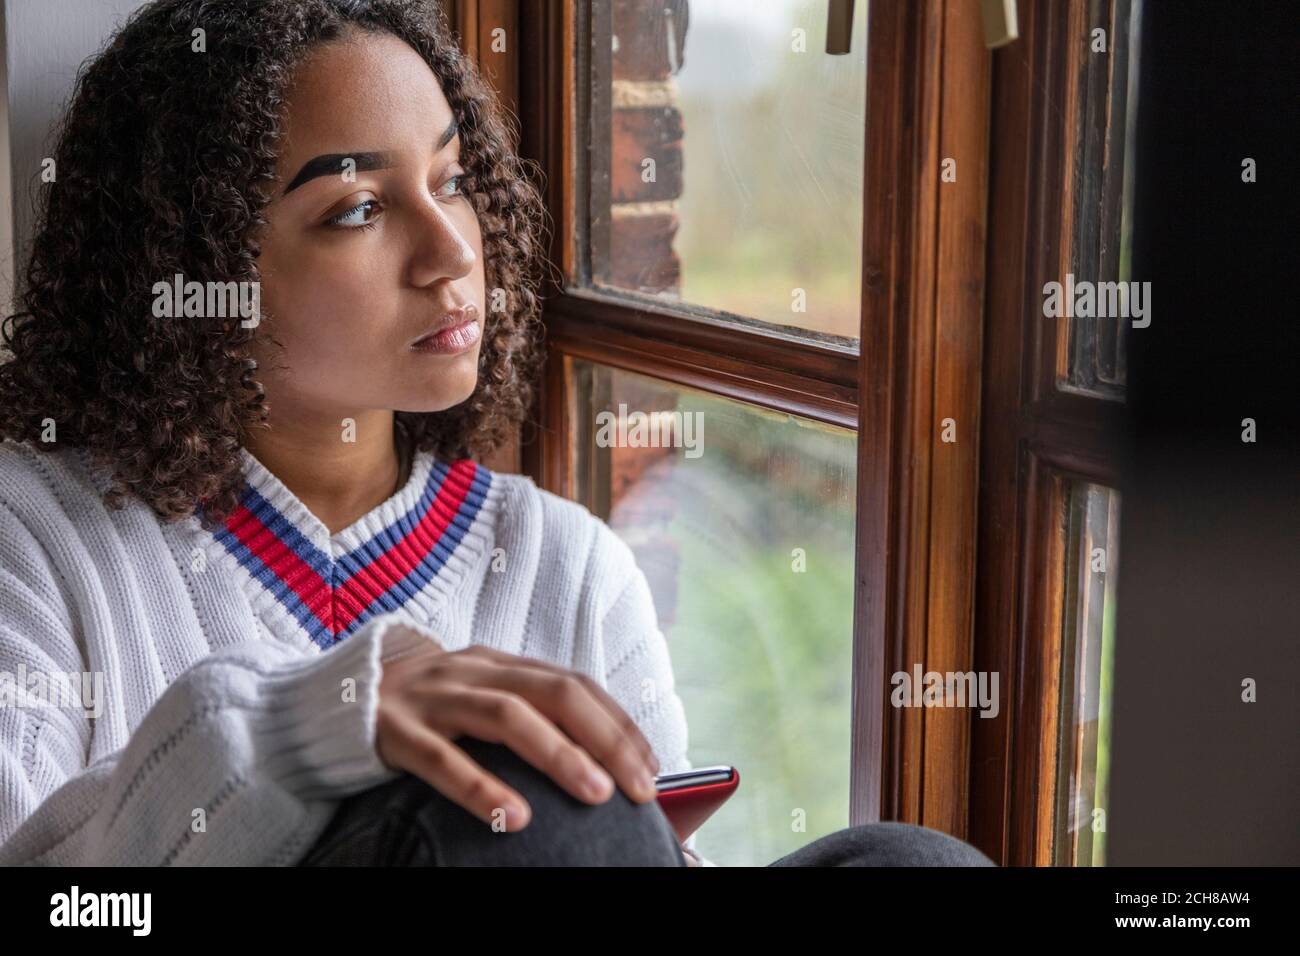 Beautiful mixed race African American girl teenager female young woman sad depressed or thoughtful looking out of a window using mobile cell phone Stock Photo